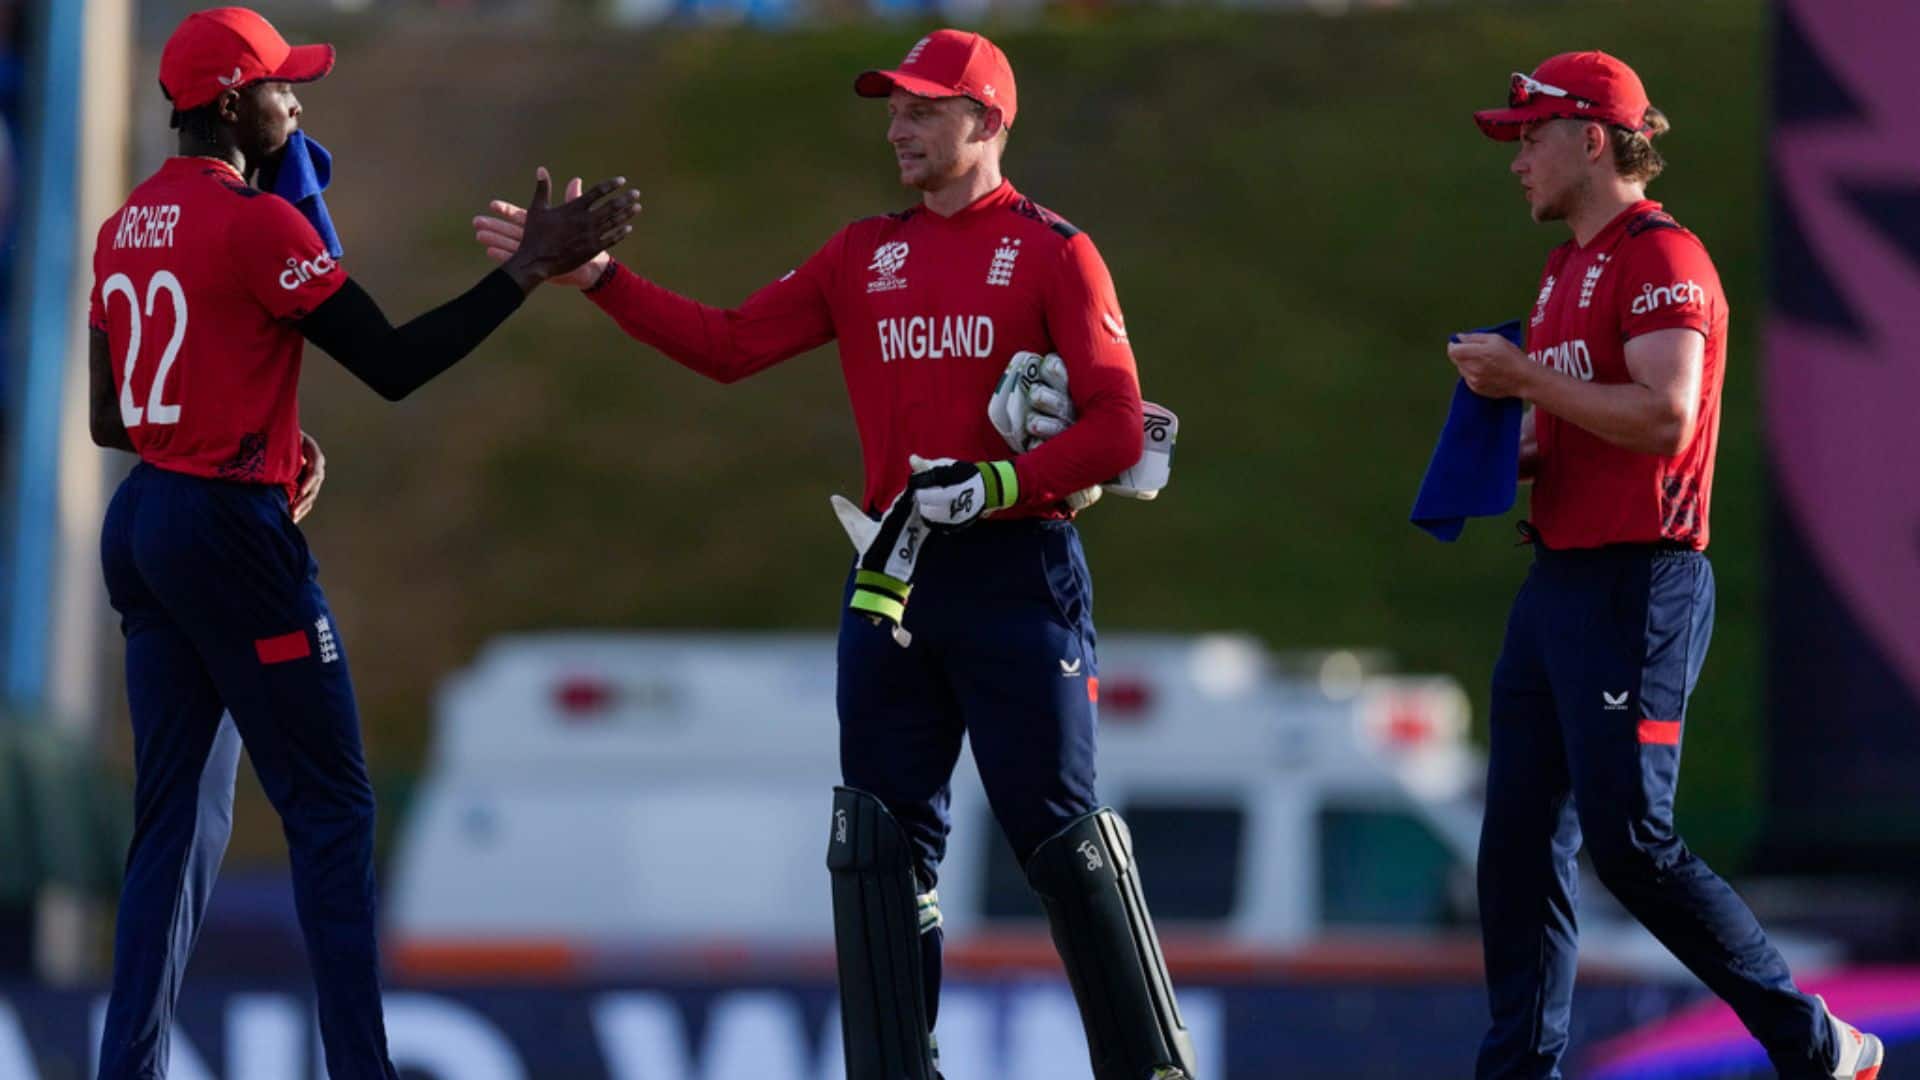 Will Jacks In, Sam Curran Out? England's Probable XI For T20 WC Super 8 Match Vs WI